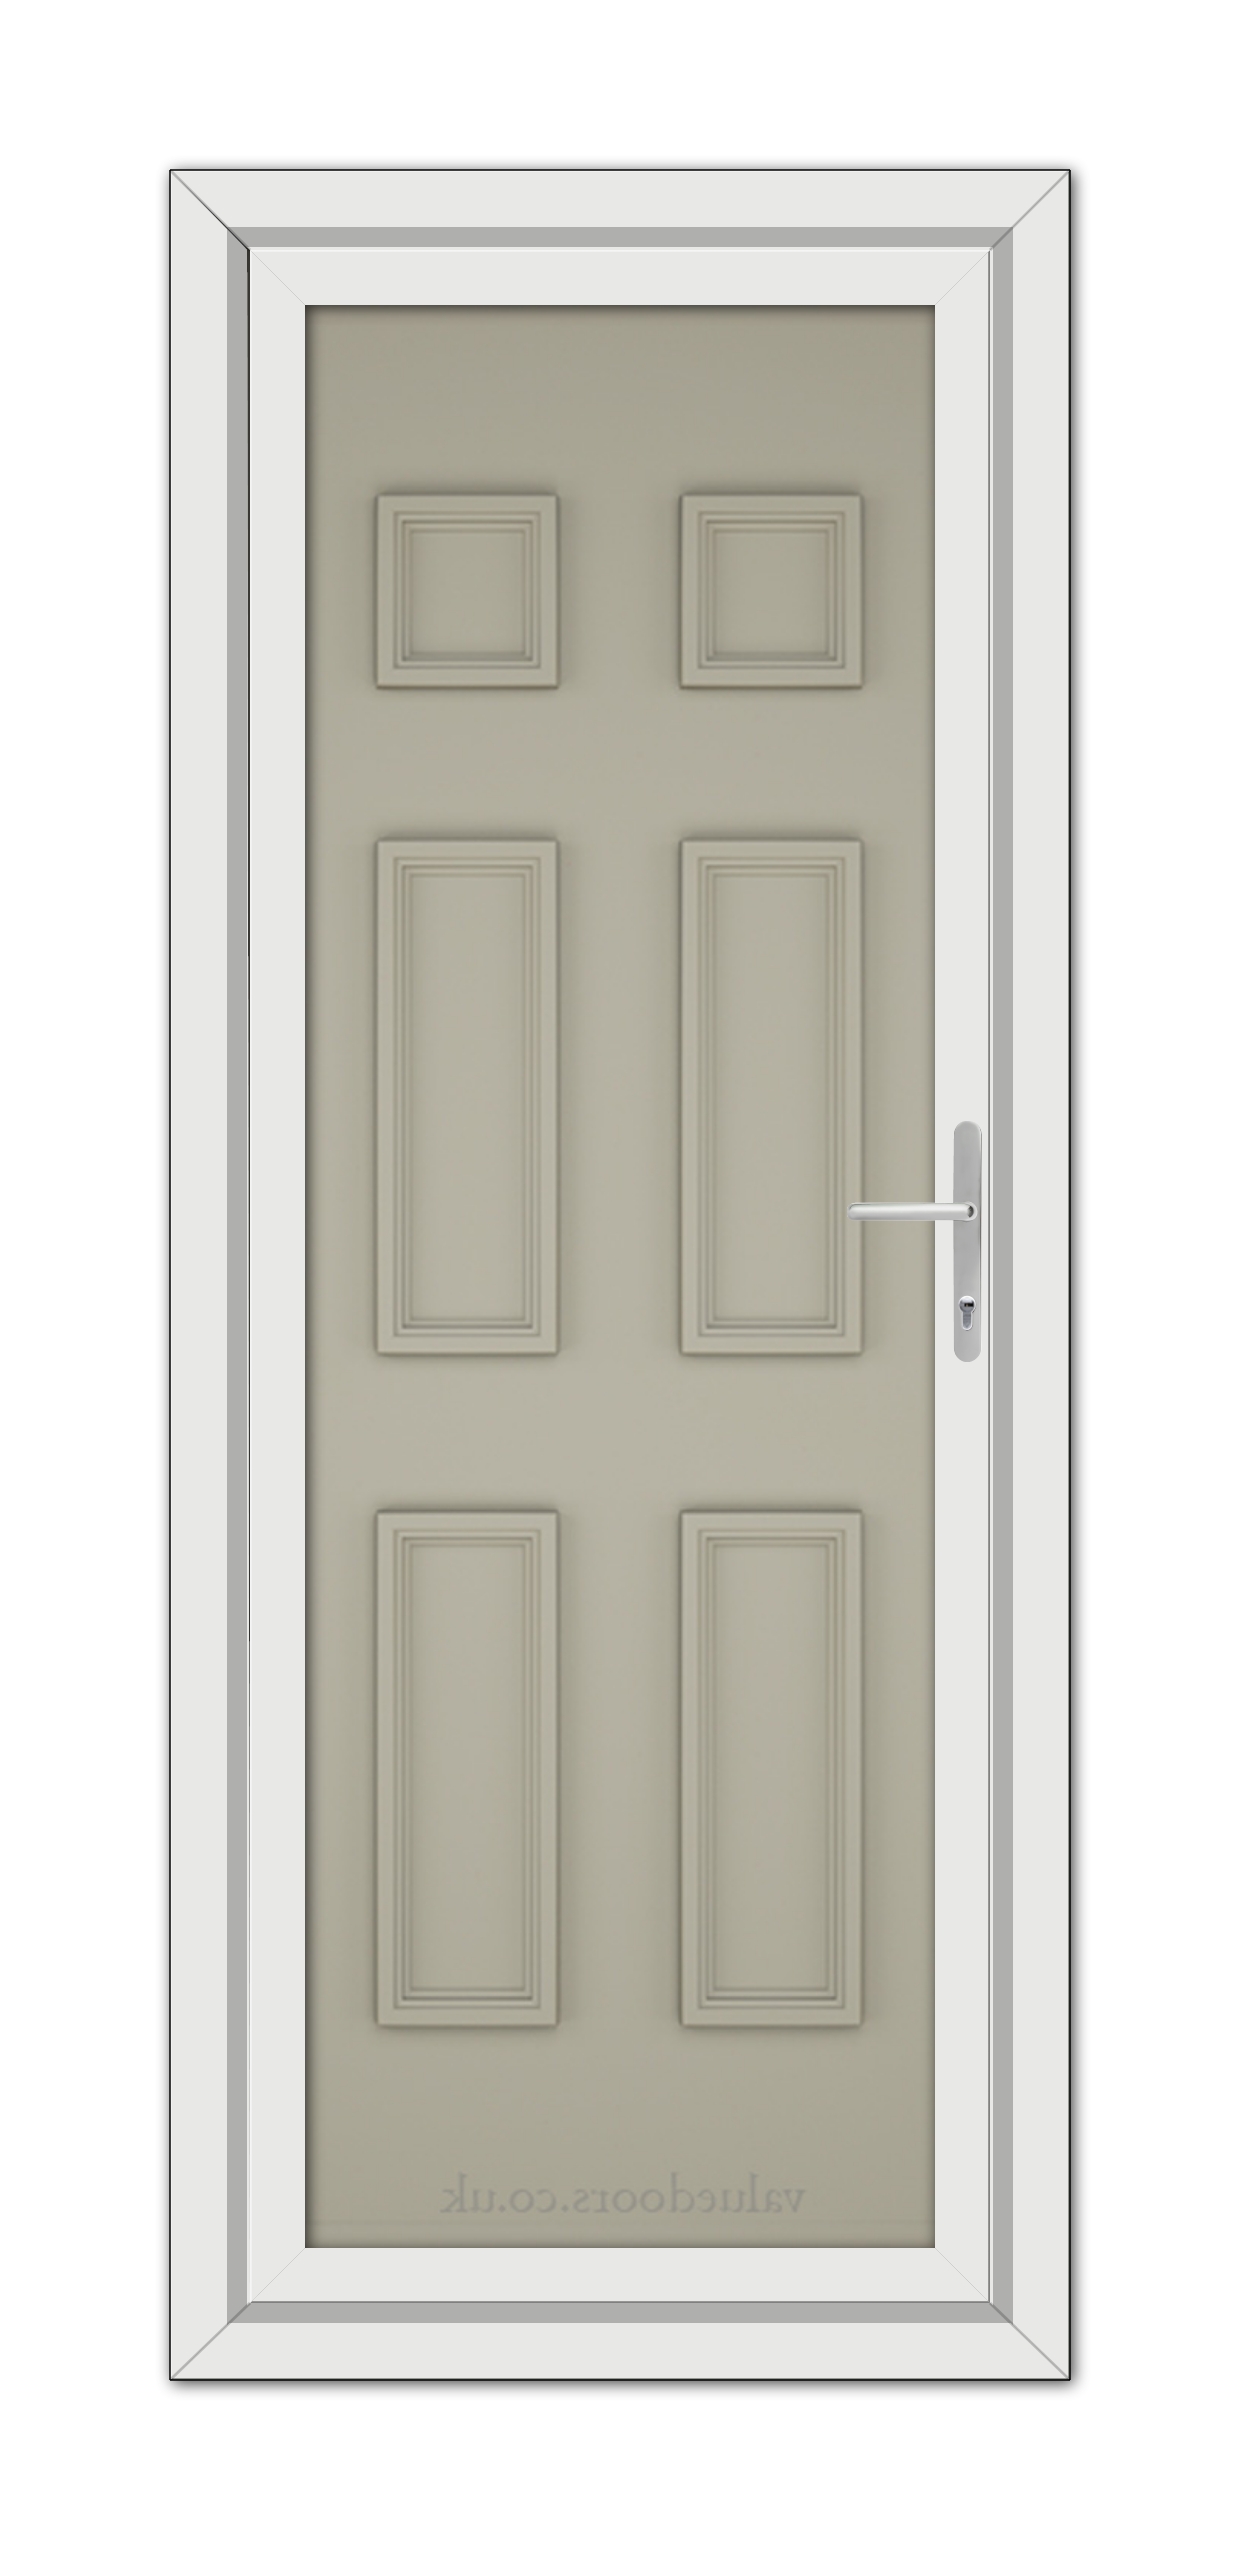 A vertical image of a closed Pebble Grey Windsor Solid uPVC Door with six panels and a metallic handle, set within a white frame.